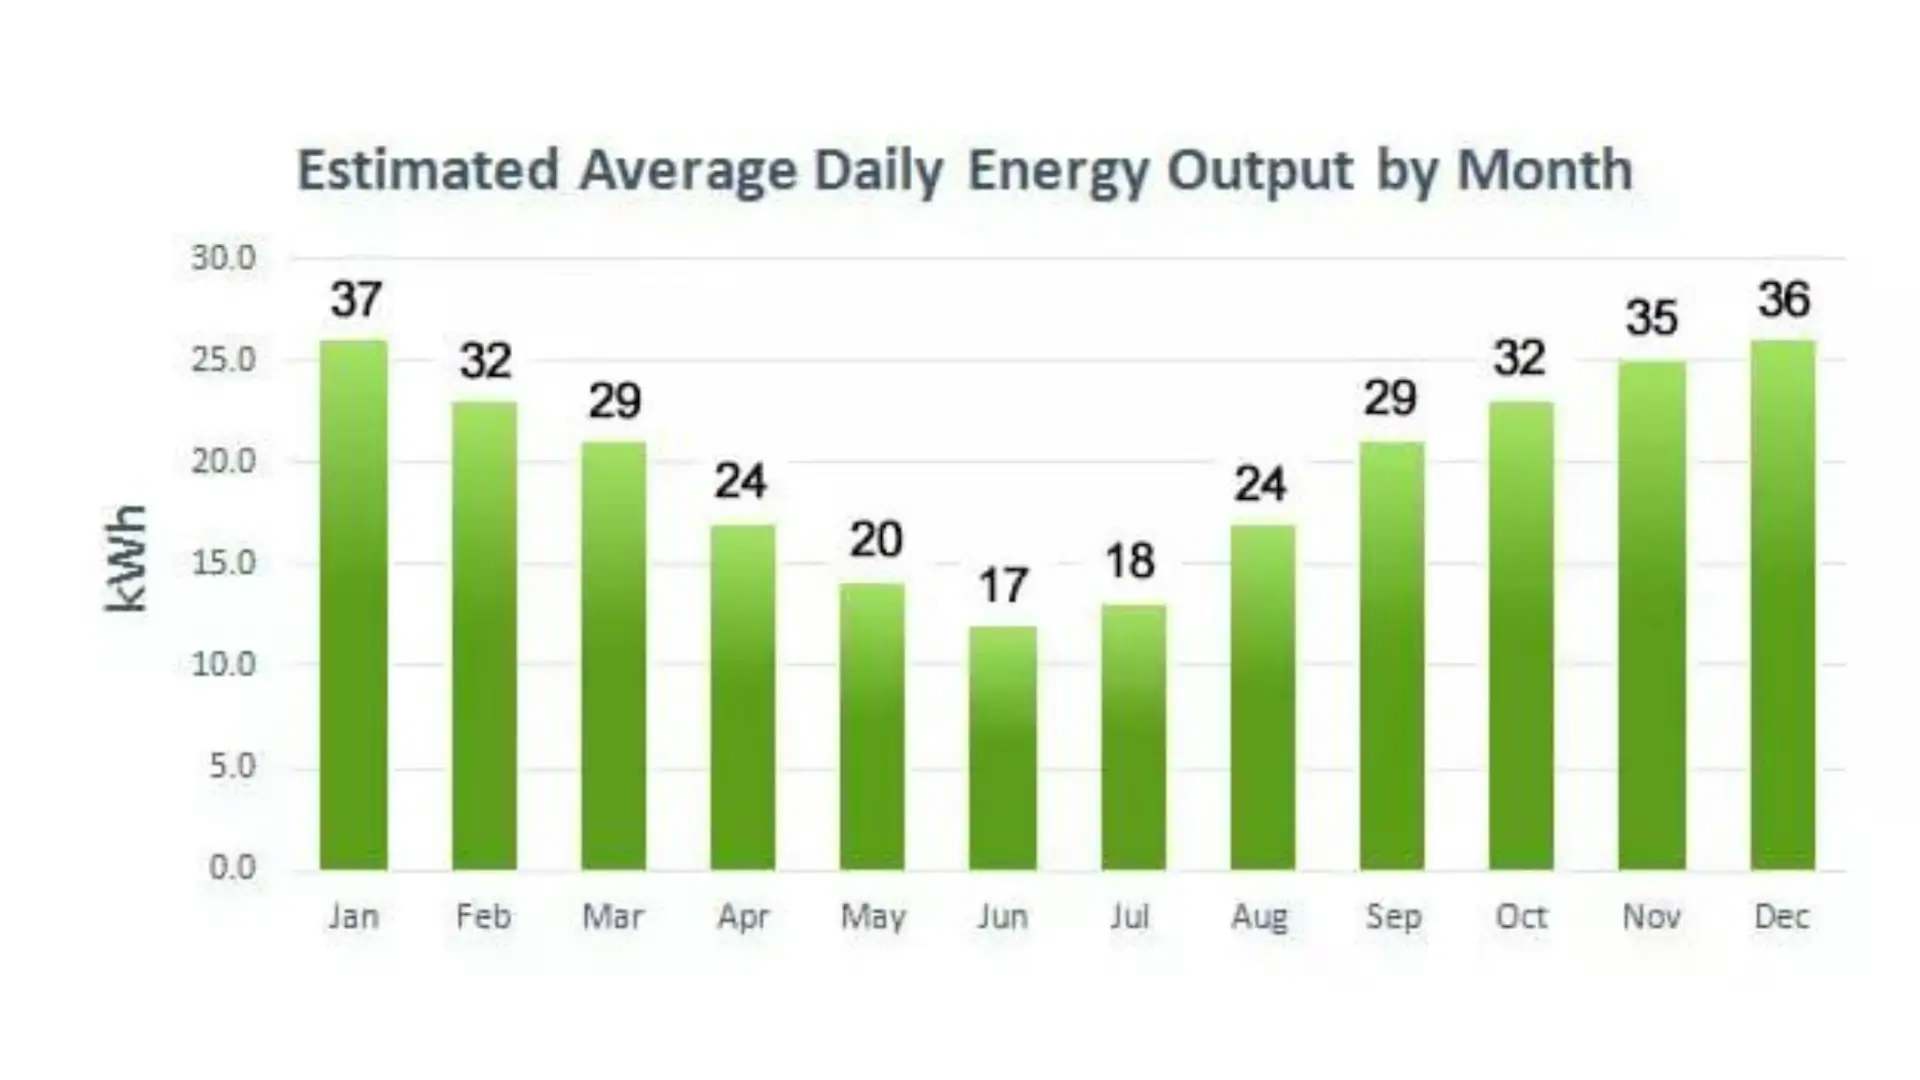 7kW solar panel system estimated average daily energy output by month